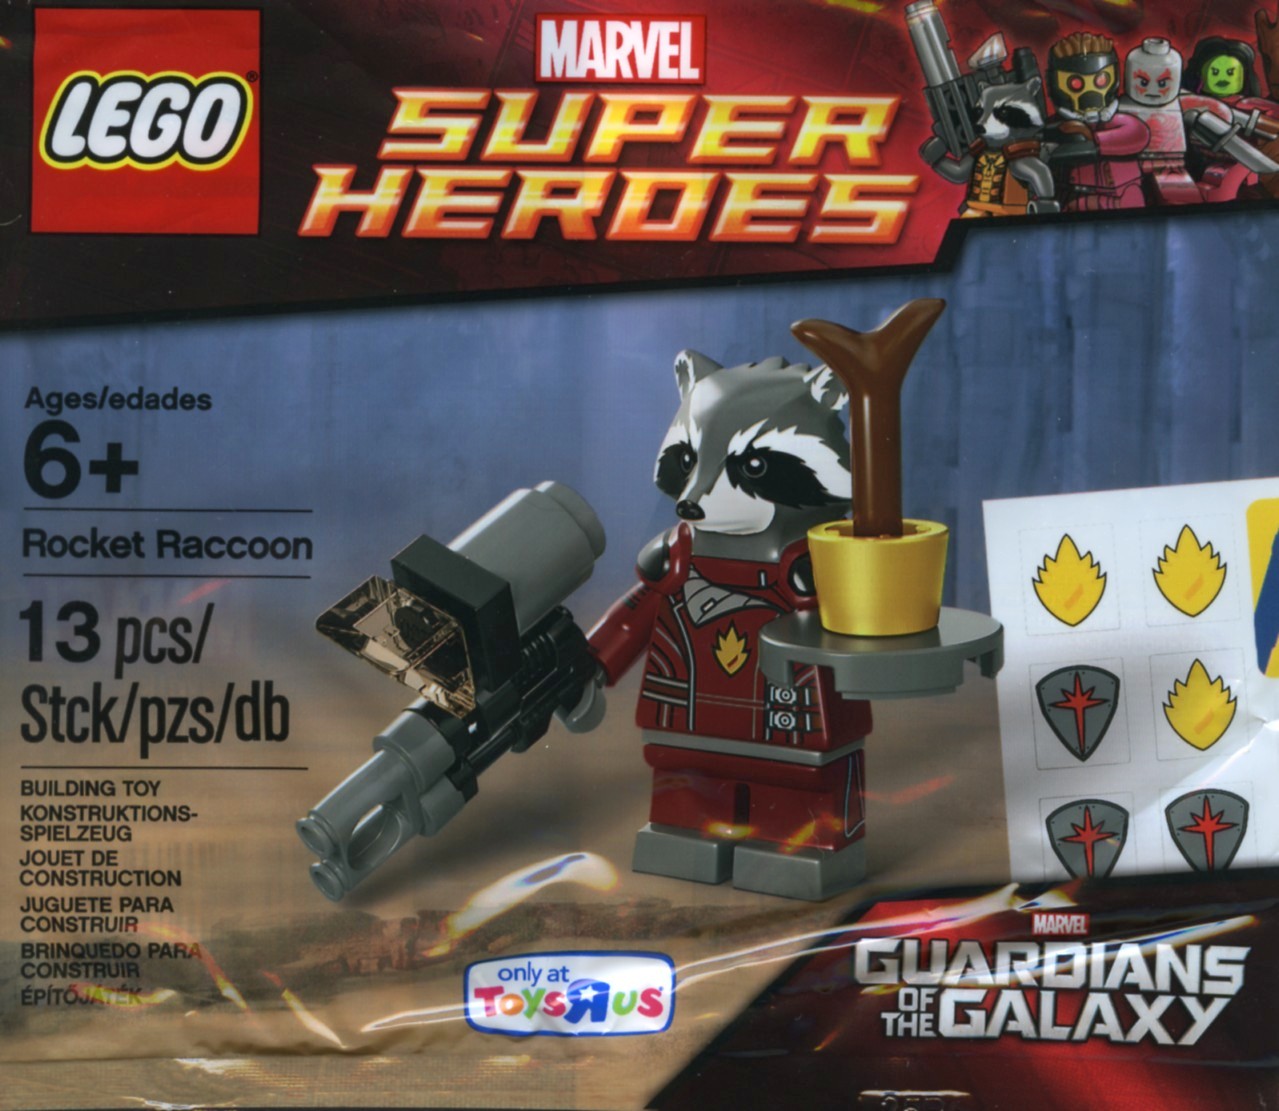 all lego guardians of the galaxy sets